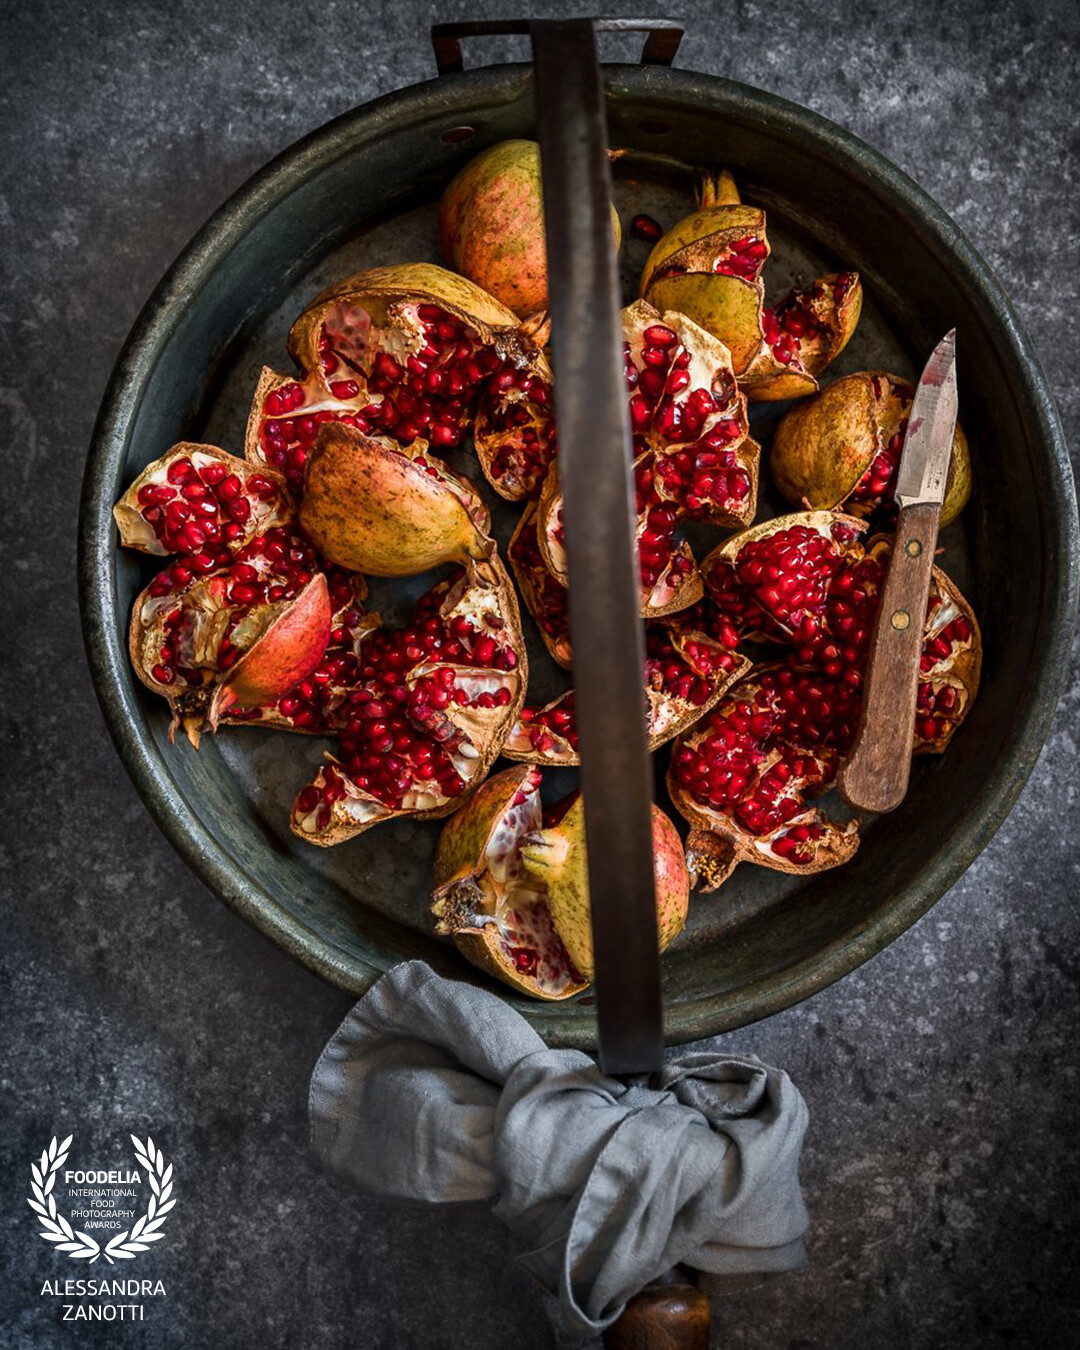 Here, using a single light source, this captivating photograph captures the evocative essence of pomegranates in a dark and moody style. The intense details, illuminated by the focused light, add a touch of drama to the composition, transforming the pomegranates into the compelling focal point of the image.